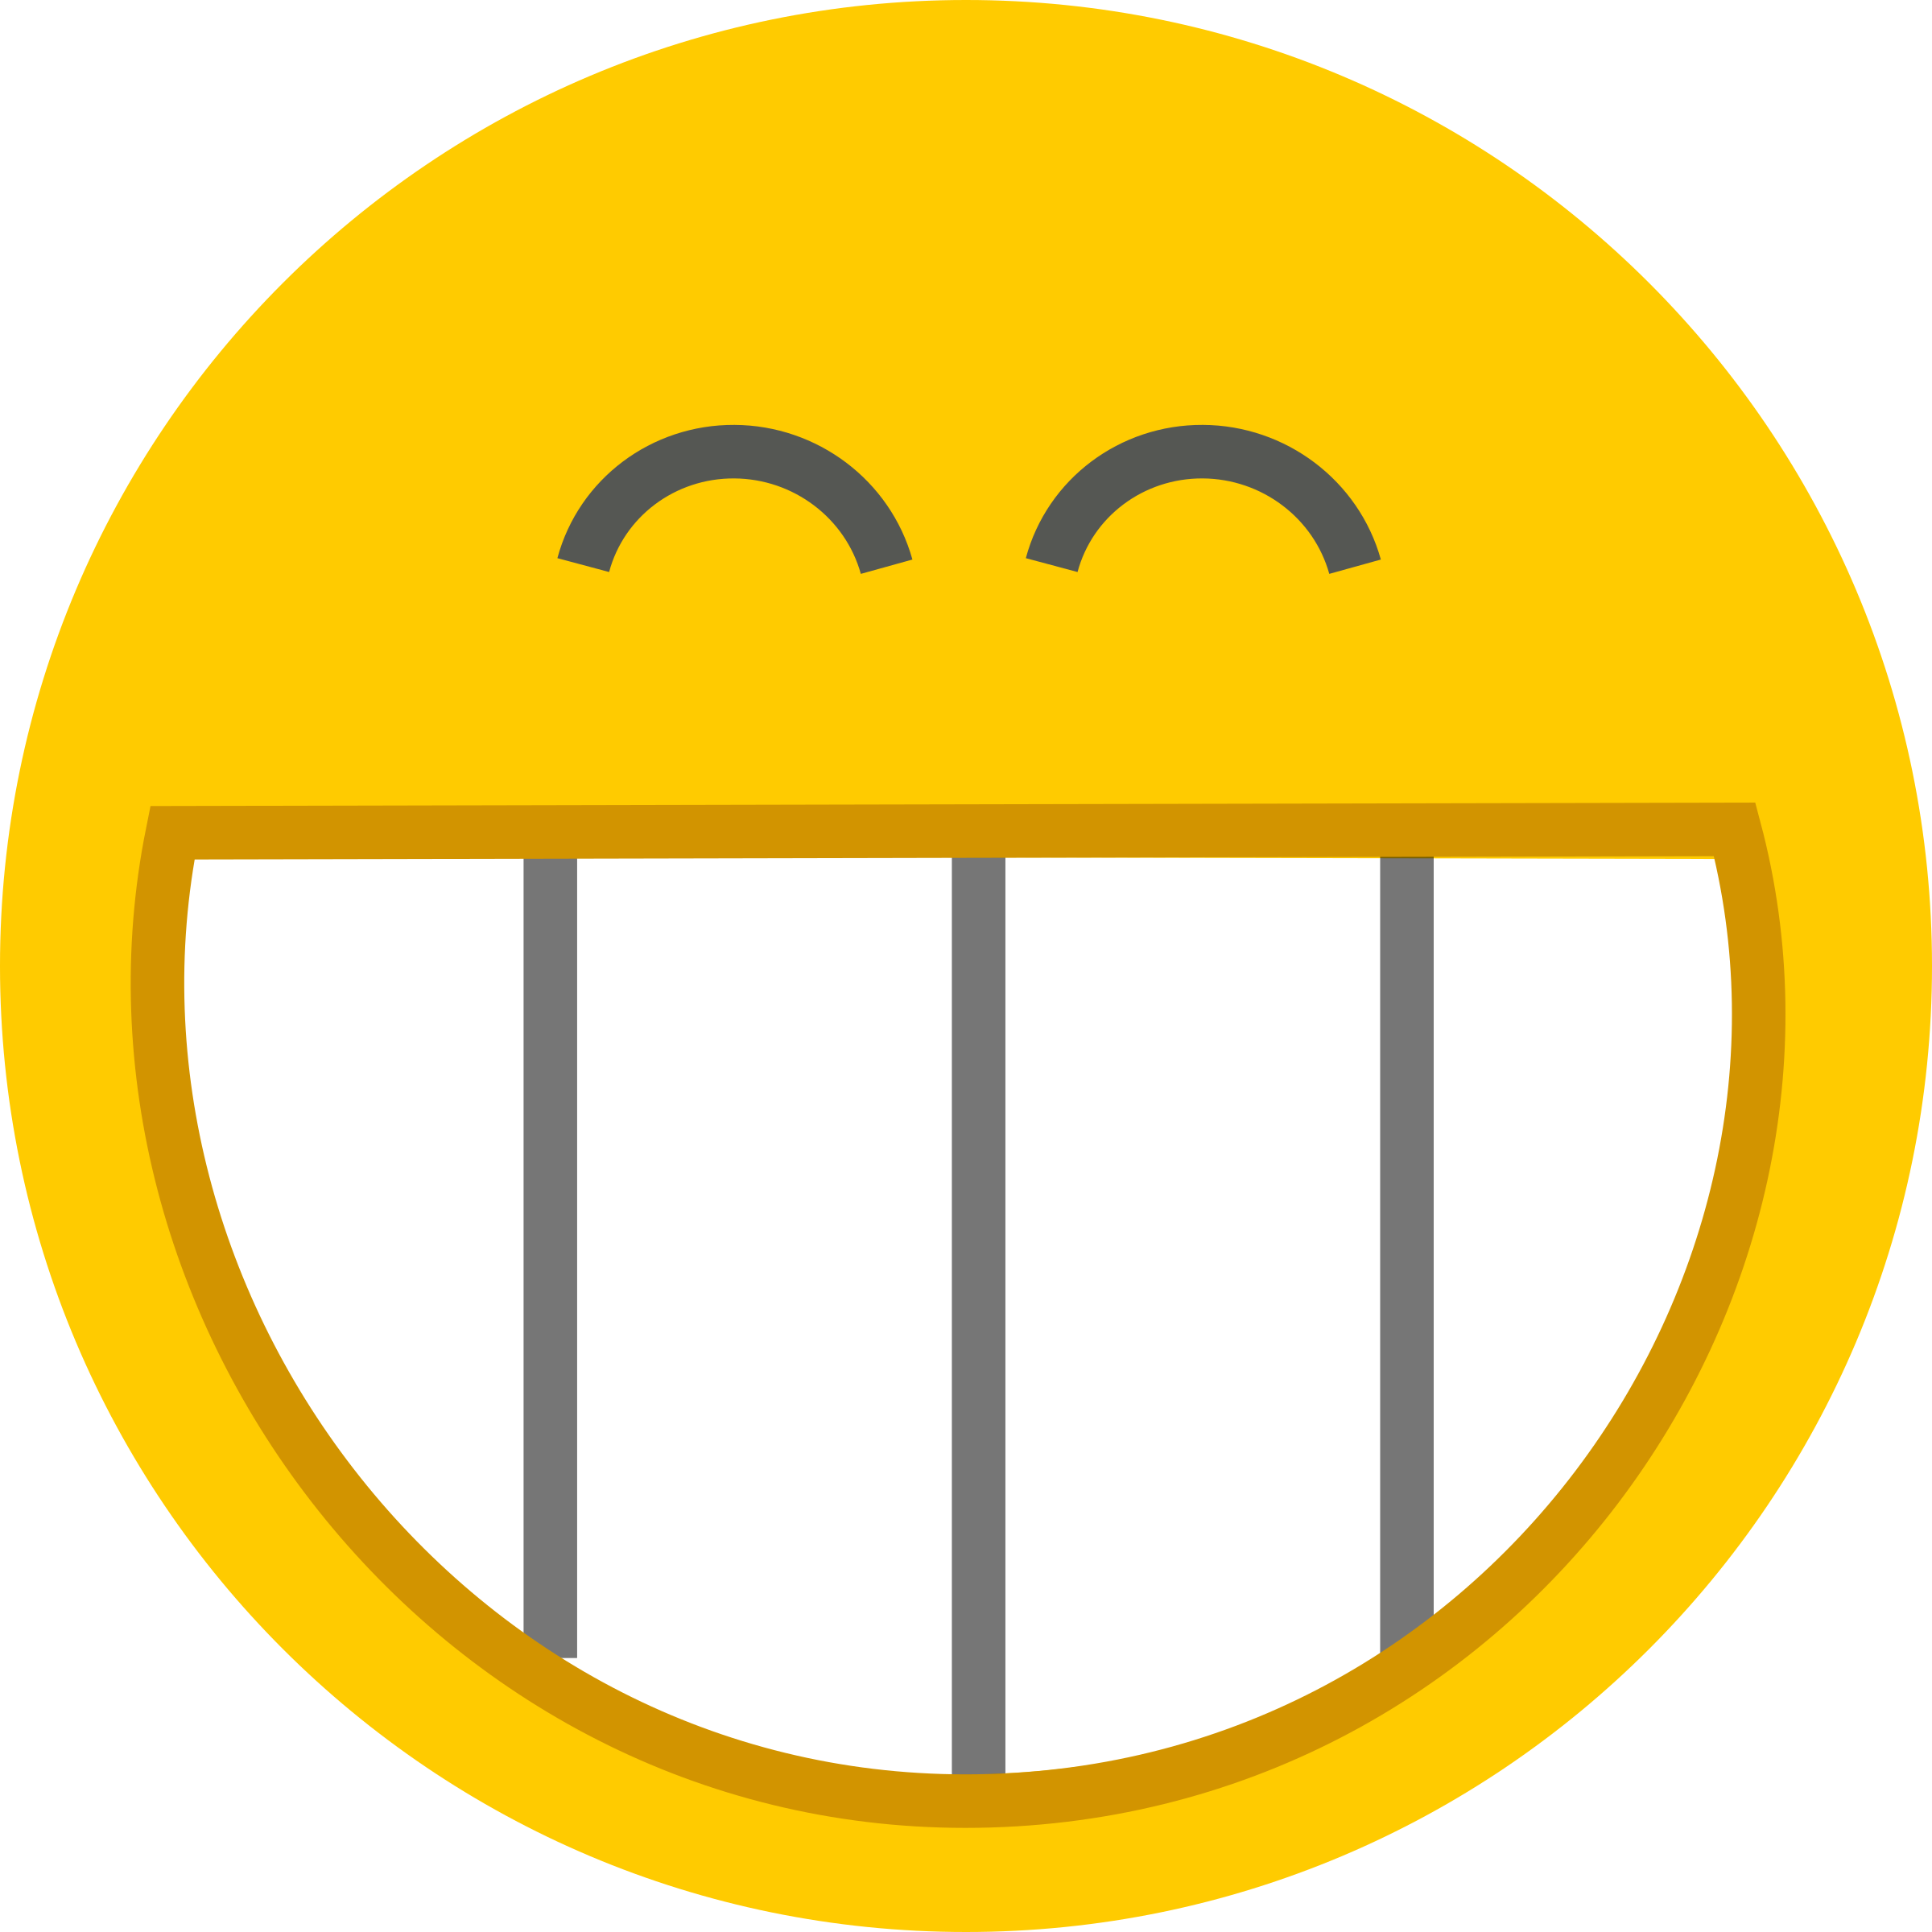 smile clipart free download - photo #16